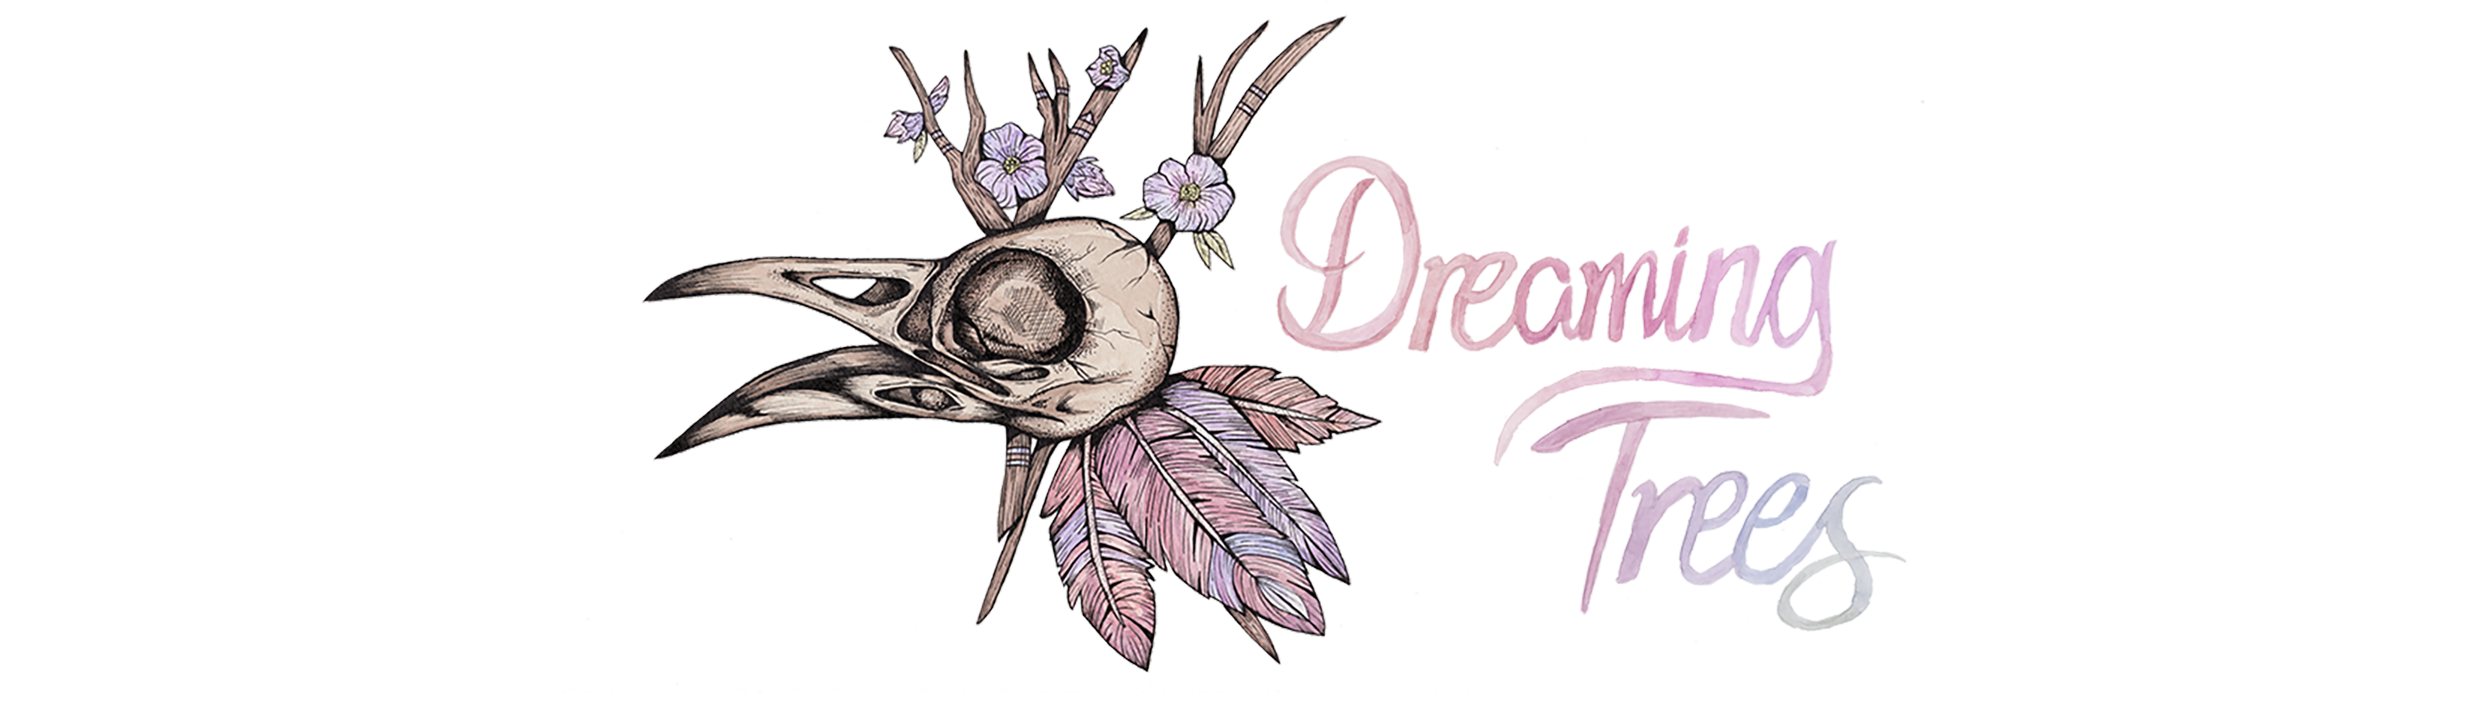 dreaming clipart inspiration